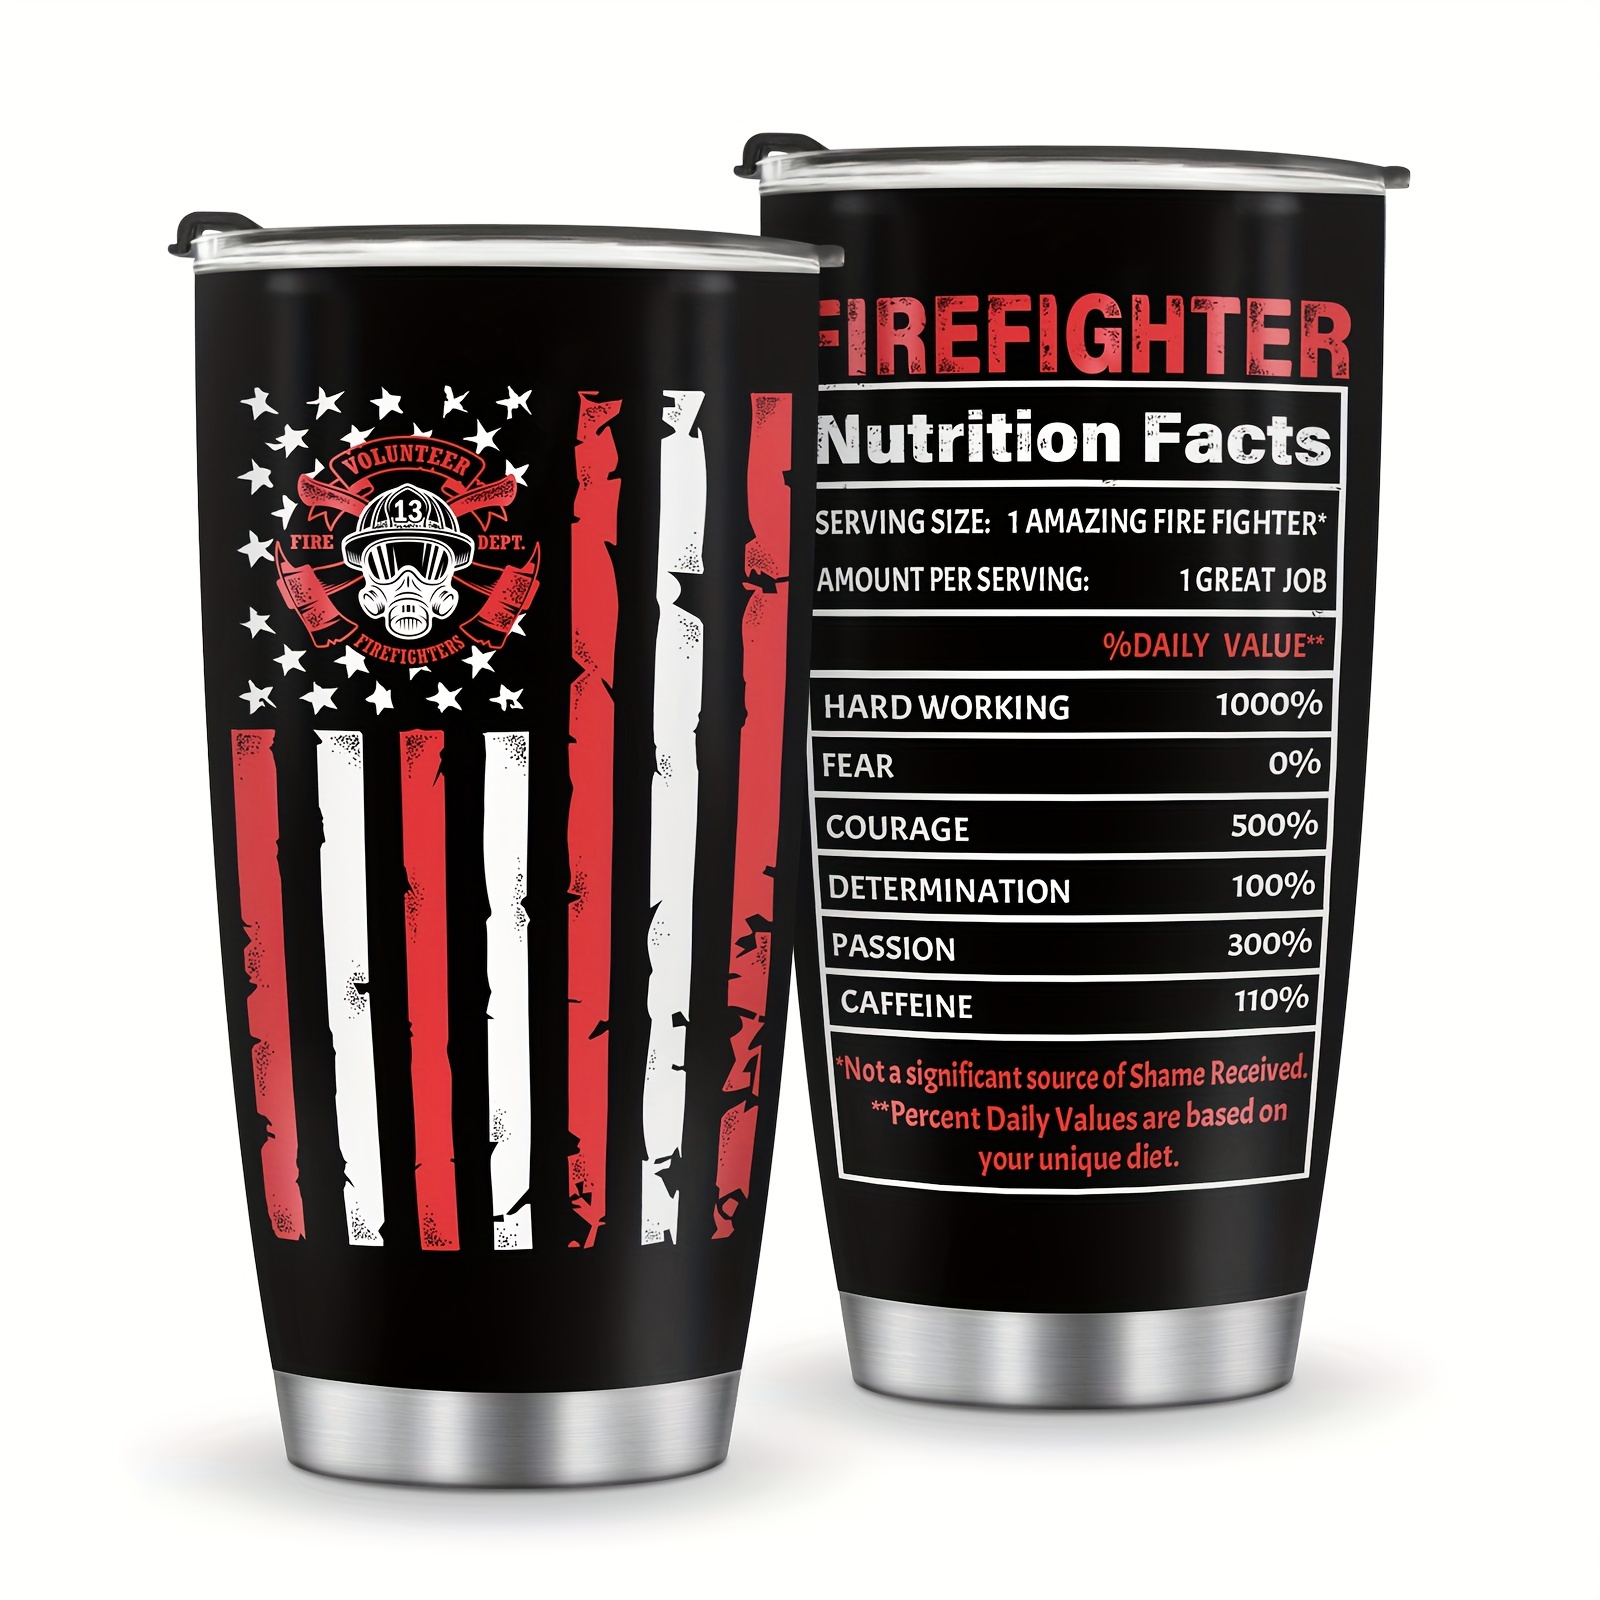 

1pc Mug Tumbler Gifts For Fire Firefighter - Fireman Birthday Christmas Fathers Day Halloween Presents For Men Boy Dad Father Husband Son Grandpa Friends Adults Gift Coffee Mug Drinking Cup